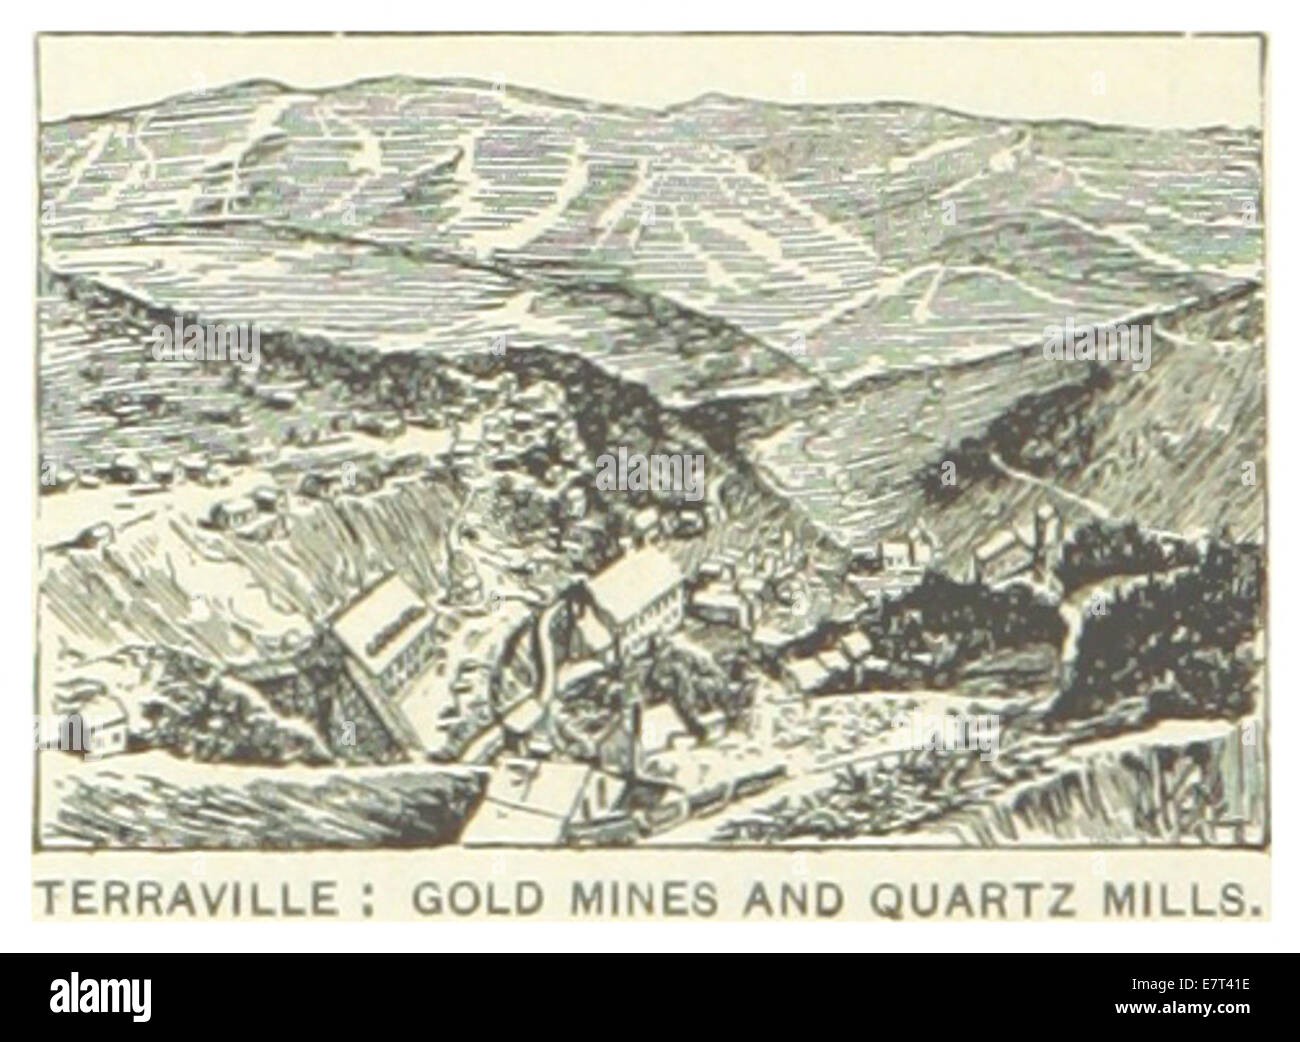 US-SD(1891) p792 TERRAVILLE, GOLD MINES Stock Photo